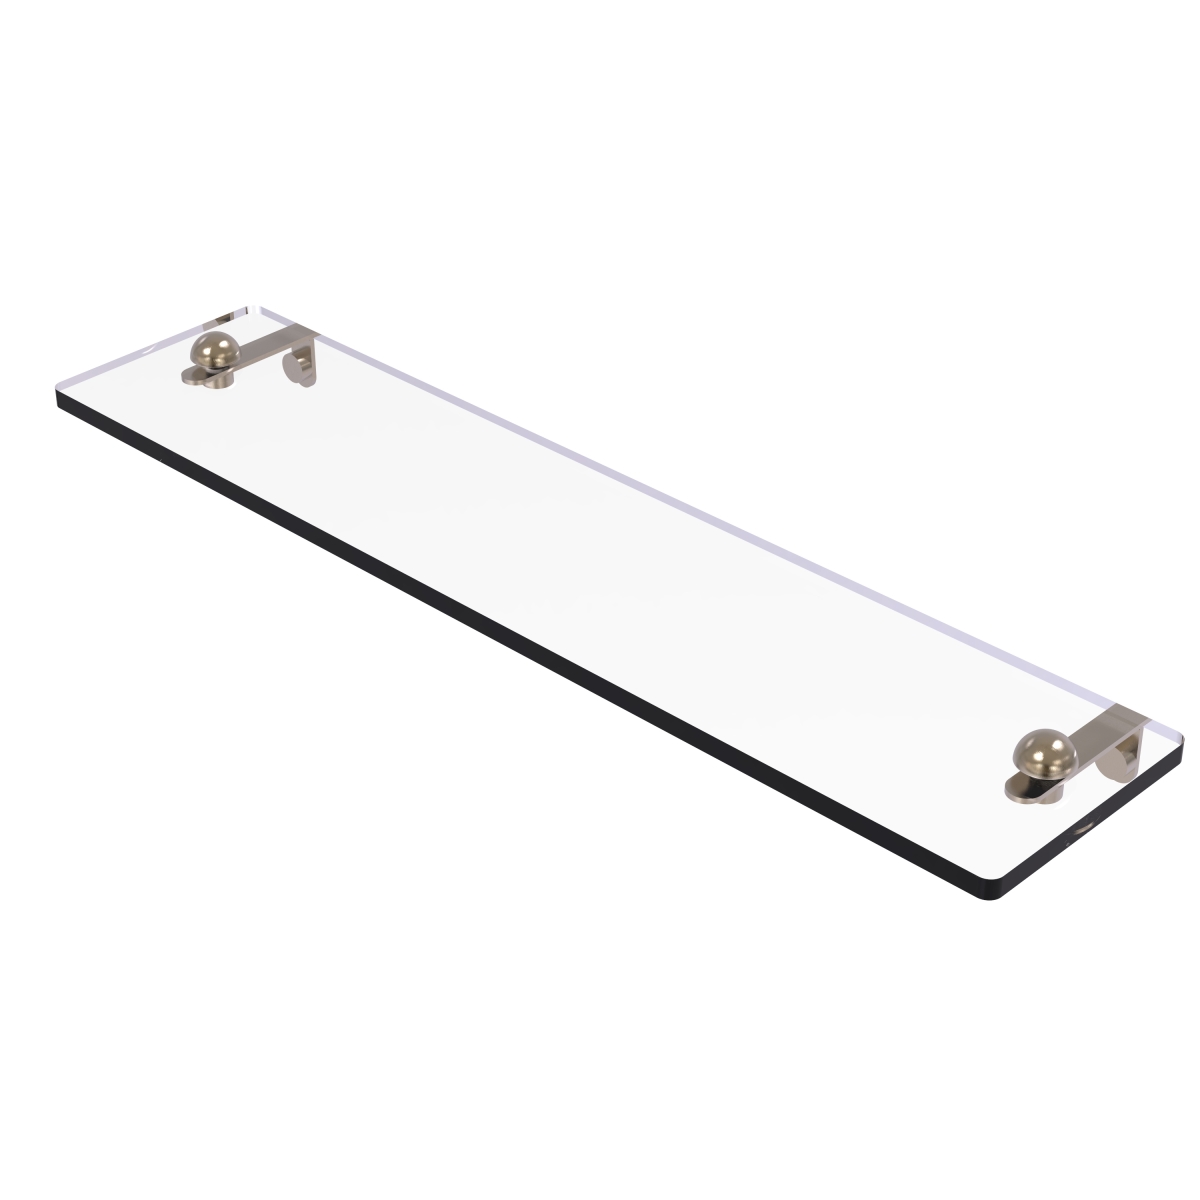 Allied Brass RC-1-22-PEW 22 in. Glass Vanity Shelf with Beveled Edges, Antique Pewter - 2 x 5 x 22 in.